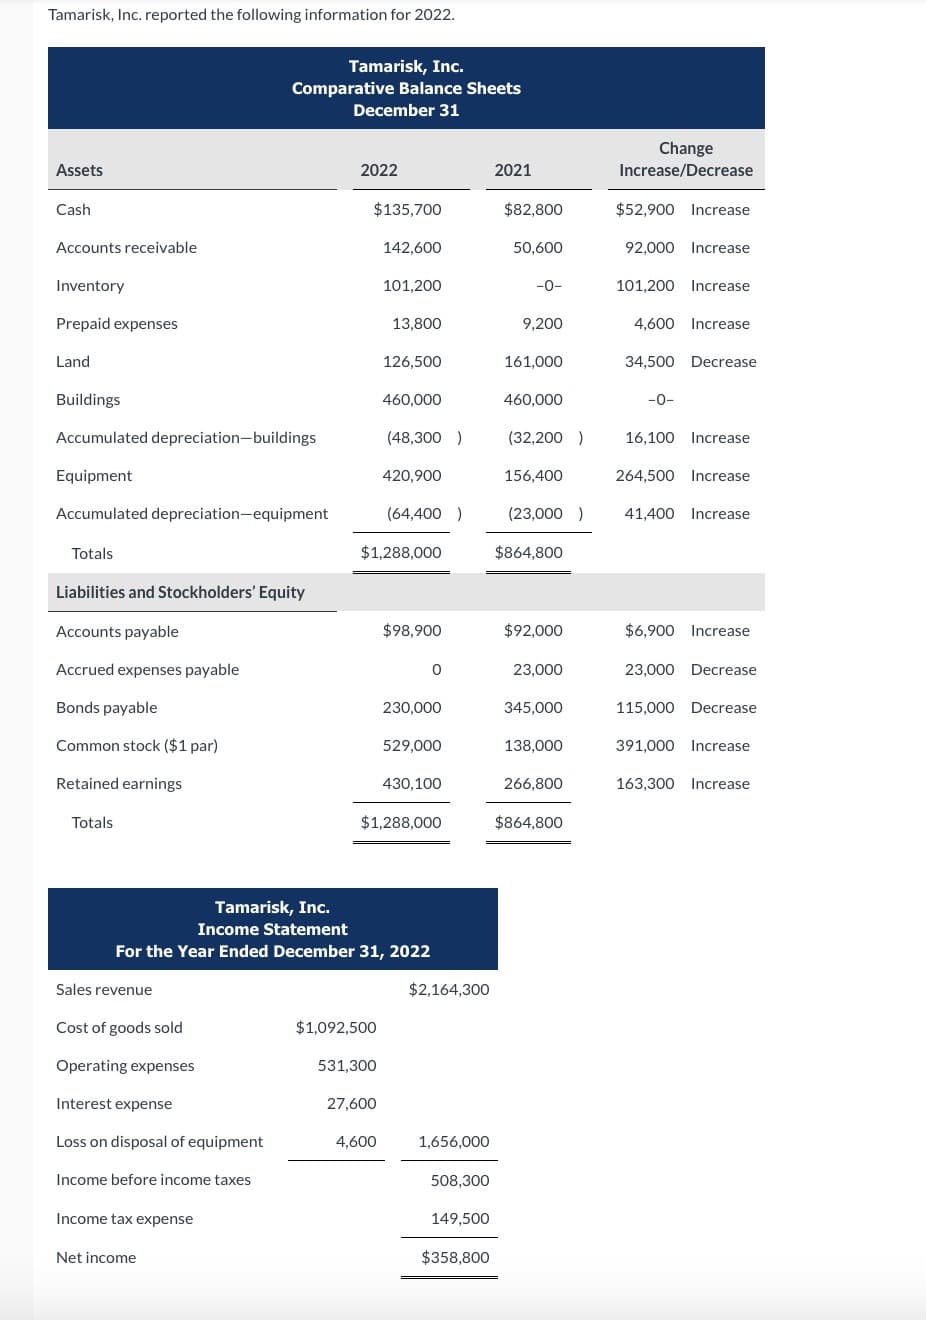 Tamarisk, Inc. reported the following information for 2022.
Assets
Cash
Accounts receivable
Inventory
Prepaid expenses
Land
Buildings
Accumulated depreciation-buildings
Equipment
Accumulated depreciation-equipment
Totals
Liabilities and Stockholders' Equity
Accounts payable
Accrued expenses payable
Bonds payable
Common stock ($1 par)
Retained earnings
Totals
Tamarisk, Inc.
Comparative Balance Sheets
December 31
Sales revenue
Cost of goods sold
Operating expenses
Interest expense
Loss on disposal of equipment
Income before income taxes
Income tax expense
Net income
2022
$135,700
$1,092,500
142,600
531,300
101,200
27,600
13,800
4,600
126,500
$1,288,000
460,000
(48,300 )
420,900
(64,400)
Tamarisk, Inc.
Income Statement
For the Year Ended December 31, 2022
$98,900
$1,288,000
0
230,000
529,000
430,100
$2,164,300
1,656,000
508,300
149,500
$358,800
2021
$82,800
50,600
-0-
9,200
161,000
460,000
(32,200 )
156,400
(23,000 )
$864,800
$92,000
23,000
345,000
138,000
266,800
$864,800
Change
Increase/Decrease
$52,900 Increase
92,000 Increase
101,200 Increase
4,600 Increase
34,500 Decrease
-0-
16,100 Increase
264,500 Increase
41,400 Increase
$6,900 Increase
23,000 Decrease
115,000 Decrease
391,000 Increase
163,300 Increase